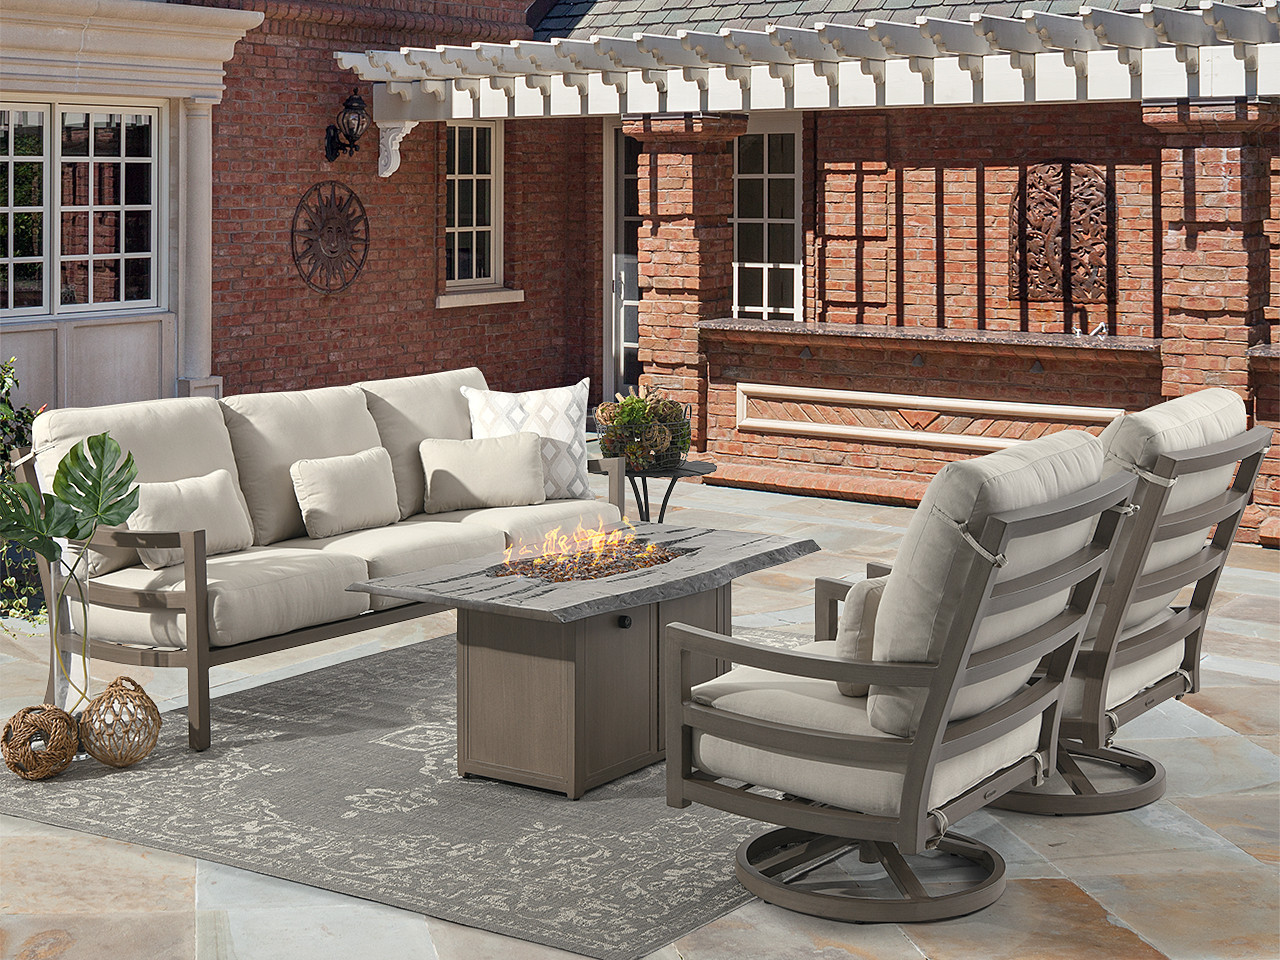 Roma Weathered Wood Aluminum and Sand Linen Cushion 4 Pc. Sofa Group and Swivel Rockers with 54 x 29 in. Fire Pit